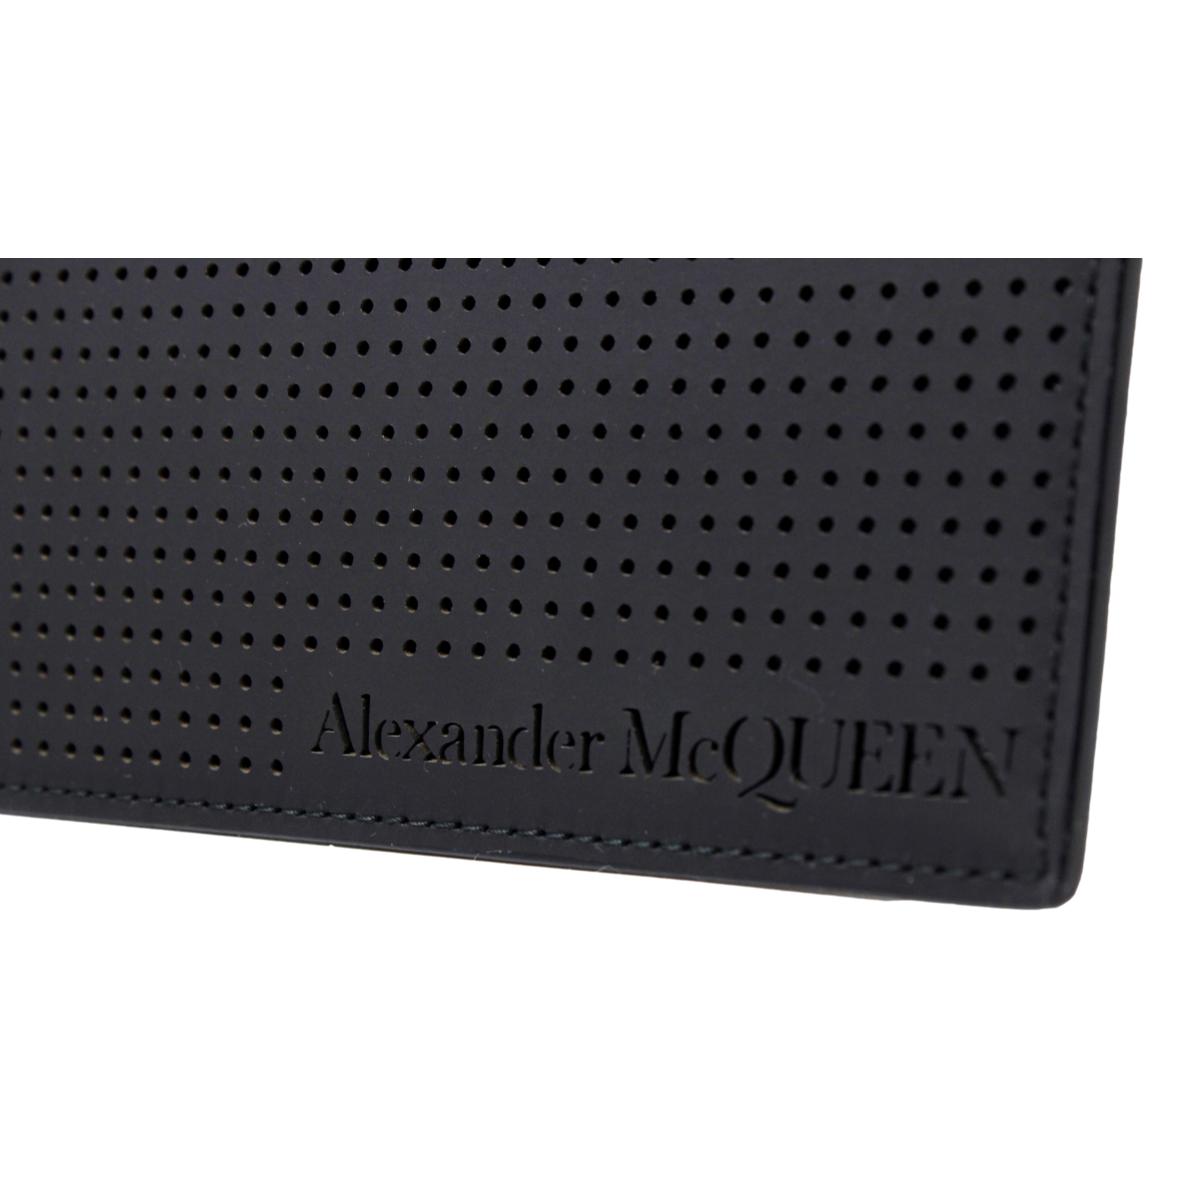 Alexander McQueen Black Leather Perforated Flat Pouch 560472